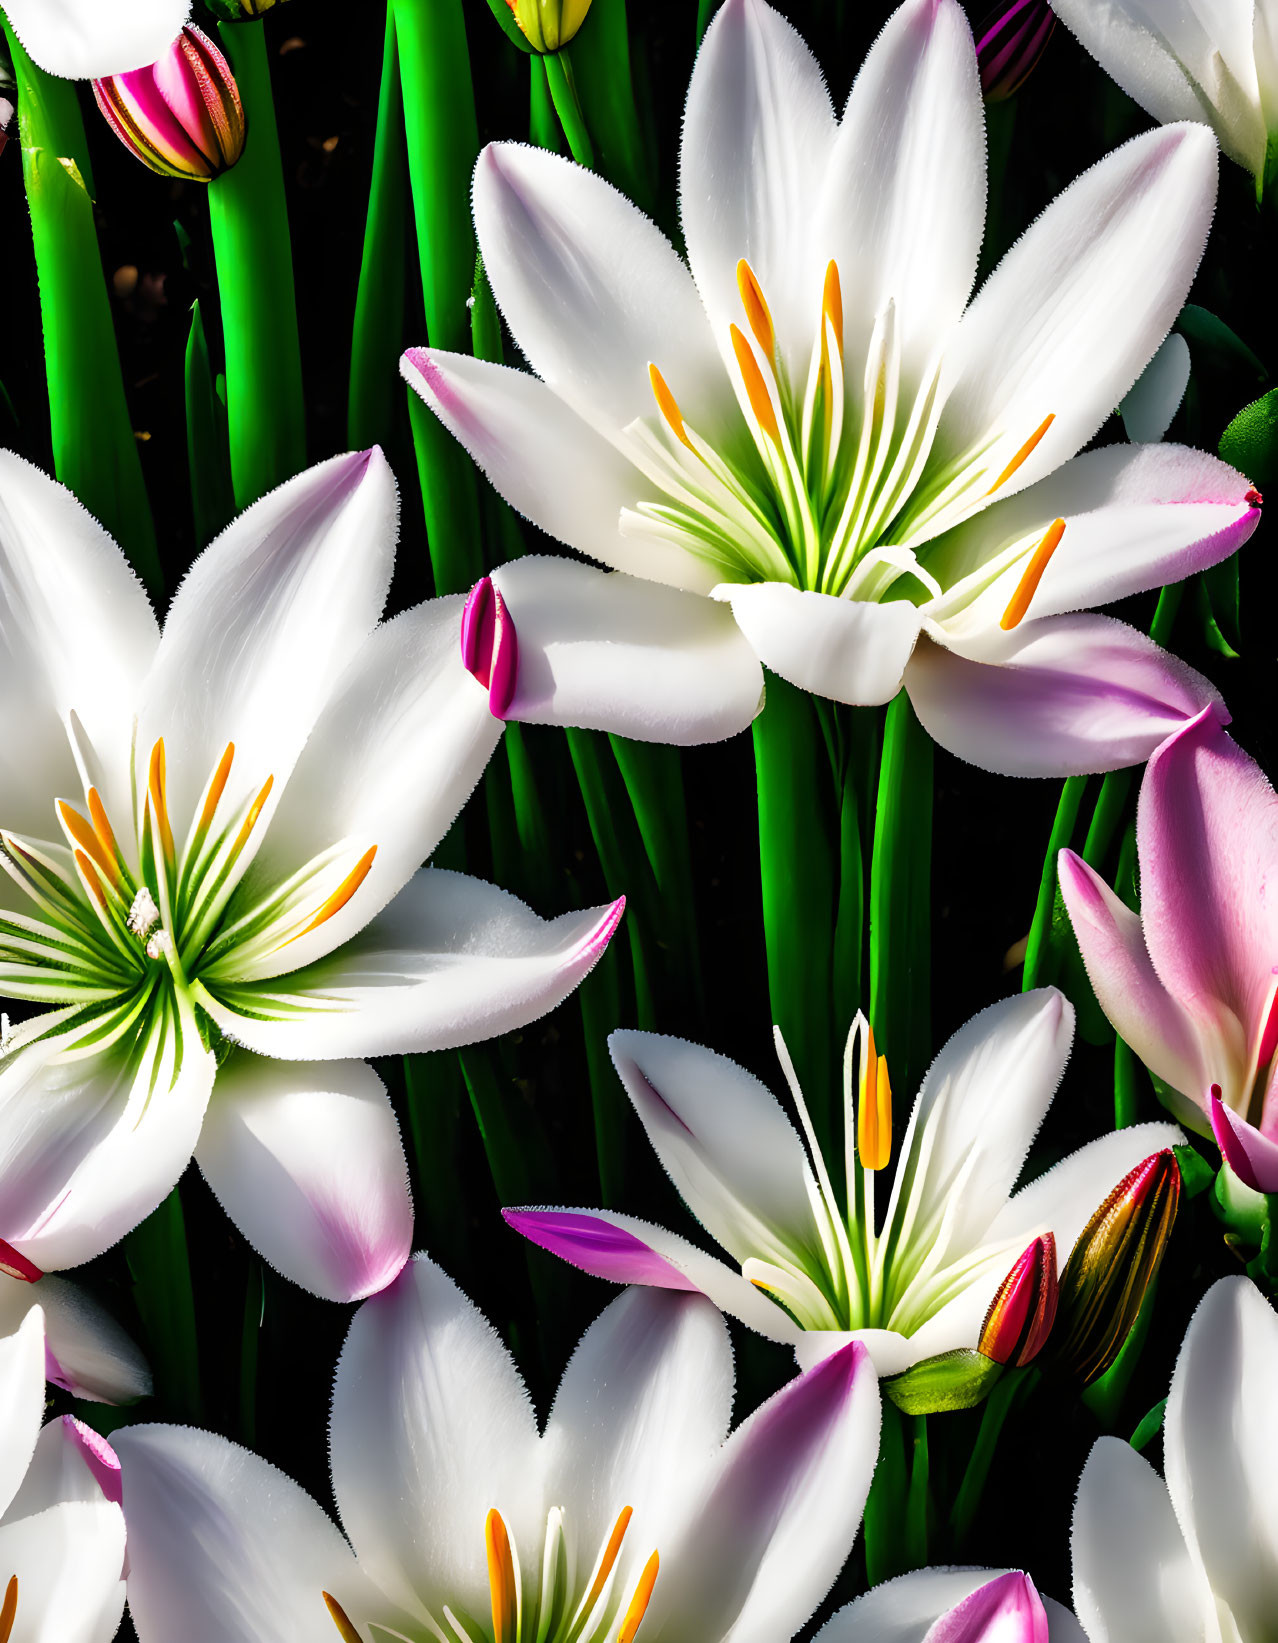 Colorful White Lilies with Yellow and Green Centers and Pink Buds